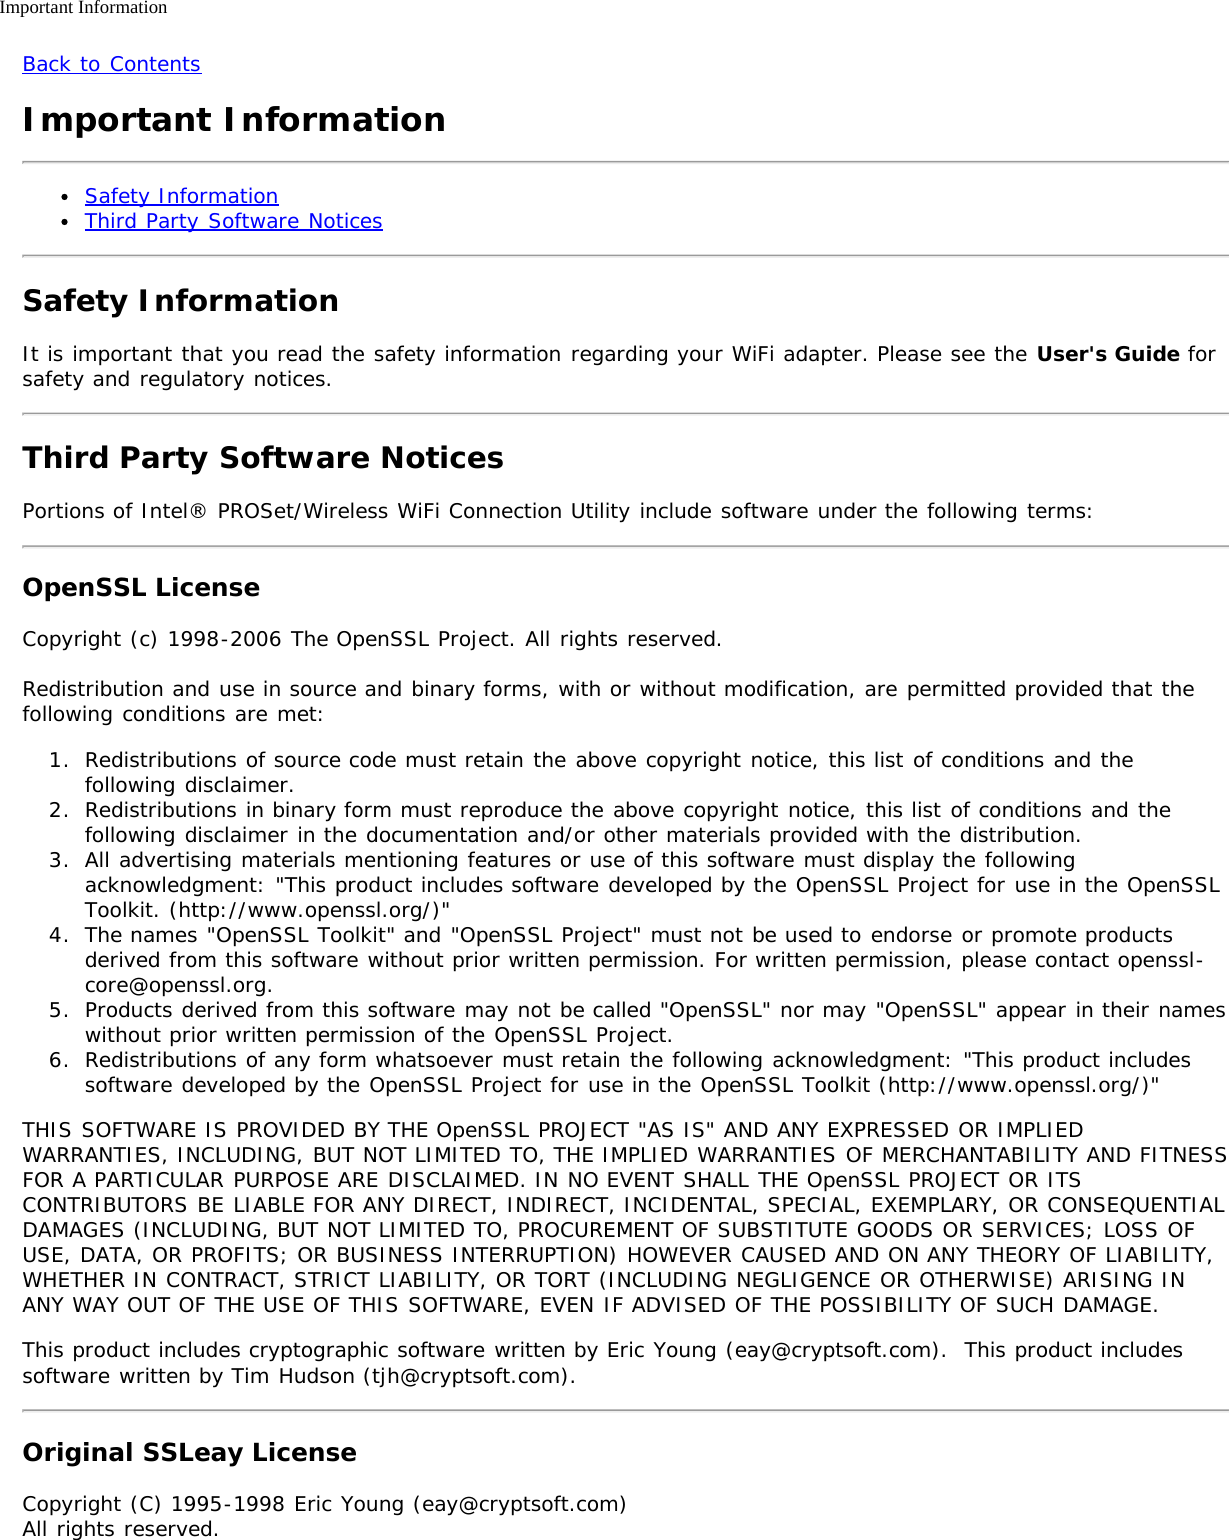 Important InformationBack to ContentsImportant InformationSafety InformationThird Party Software NoticesSafety InformationIt is important that you read the safety information regarding your WiFi adapter. Please see the User&apos;s Guide forsafety and regulatory notices.Third Party Software NoticesPortions of Intel® PROSet/Wireless WiFi Connection Utility include software under the following terms:OpenSSL LicenseCopyright (c) 1998-2006 The OpenSSL Project. All rights reserved.Redistribution and use in source and binary forms, with or without modification, are permitted provided that thefollowing conditions are met:1.  Redistributions of source code must retain the above copyright notice, this list of conditions and thefollowing disclaimer.2.  Redistributions in binary form must reproduce the above copyright notice, this list of conditions and thefollowing disclaimer in the documentation and/or other materials provided with the distribution.3.  All advertising materials mentioning features or use of this software must display the followingacknowledgment: &quot;This product includes software developed by the OpenSSL Project for use in the OpenSSLToolkit. (http://www.openssl.org/)&quot;4.  The names &quot;OpenSSL Toolkit&quot; and &quot;OpenSSL Project&quot; must not be used to endorse or promote productsderived from this software without prior written permission. For written permission, please contact openssl-core@openssl.org.5.  Products derived from this software may not be called &quot;OpenSSL&quot; nor may &quot;OpenSSL&quot; appear in their nameswithout prior written permission of the OpenSSL Project.6.  Redistributions of any form whatsoever must retain the following acknowledgment: &quot;This product includessoftware developed by the OpenSSL Project for use in the OpenSSL Toolkit (http://www.openssl.org/)&quot;THIS SOFTWARE IS PROVIDED BY THE OpenSSL PROJECT &quot;AS IS&quot; AND ANY EXPRESSED OR IMPLIEDWARRANTIES, INCLUDING, BUT NOT LIMITED TO, THE IMPLIED WARRANTIES OF MERCHANTABILITY AND FITNESSFOR A PARTICULAR PURPOSE ARE DISCLAIMED. IN NO EVENT SHALL THE OpenSSL PROJECT OR ITSCONTRIBUTORS BE LIABLE FOR ANY DIRECT, INDIRECT, INCIDENTAL, SPECIAL, EXEMPLARY, OR CONSEQUENTIALDAMAGES (INCLUDING, BUT NOT LIMITED TO, PROCUREMENT OF SUBSTITUTE GOODS OR SERVICES; LOSS OFUSE, DATA, OR PROFITS; OR BUSINESS INTERRUPTION) HOWEVER CAUSED AND ON ANY THEORY OF LIABILITY,WHETHER IN CONTRACT, STRICT LIABILITY, OR TORT (INCLUDING NEGLIGENCE OR OTHERWISE) ARISING INANY WAY OUT OF THE USE OF THIS SOFTWARE, EVEN IF ADVISED OF THE POSSIBILITY OF SUCH DAMAGE.This product includes cryptographic software written by Eric Young (eay@cryptsoft.com).  This product includessoftware written by Tim Hudson (tjh@cryptsoft.com).Original SSLeay LicenseCopyright (C) 1995-1998 Eric Young (eay@cryptsoft.com)All rights reserved.